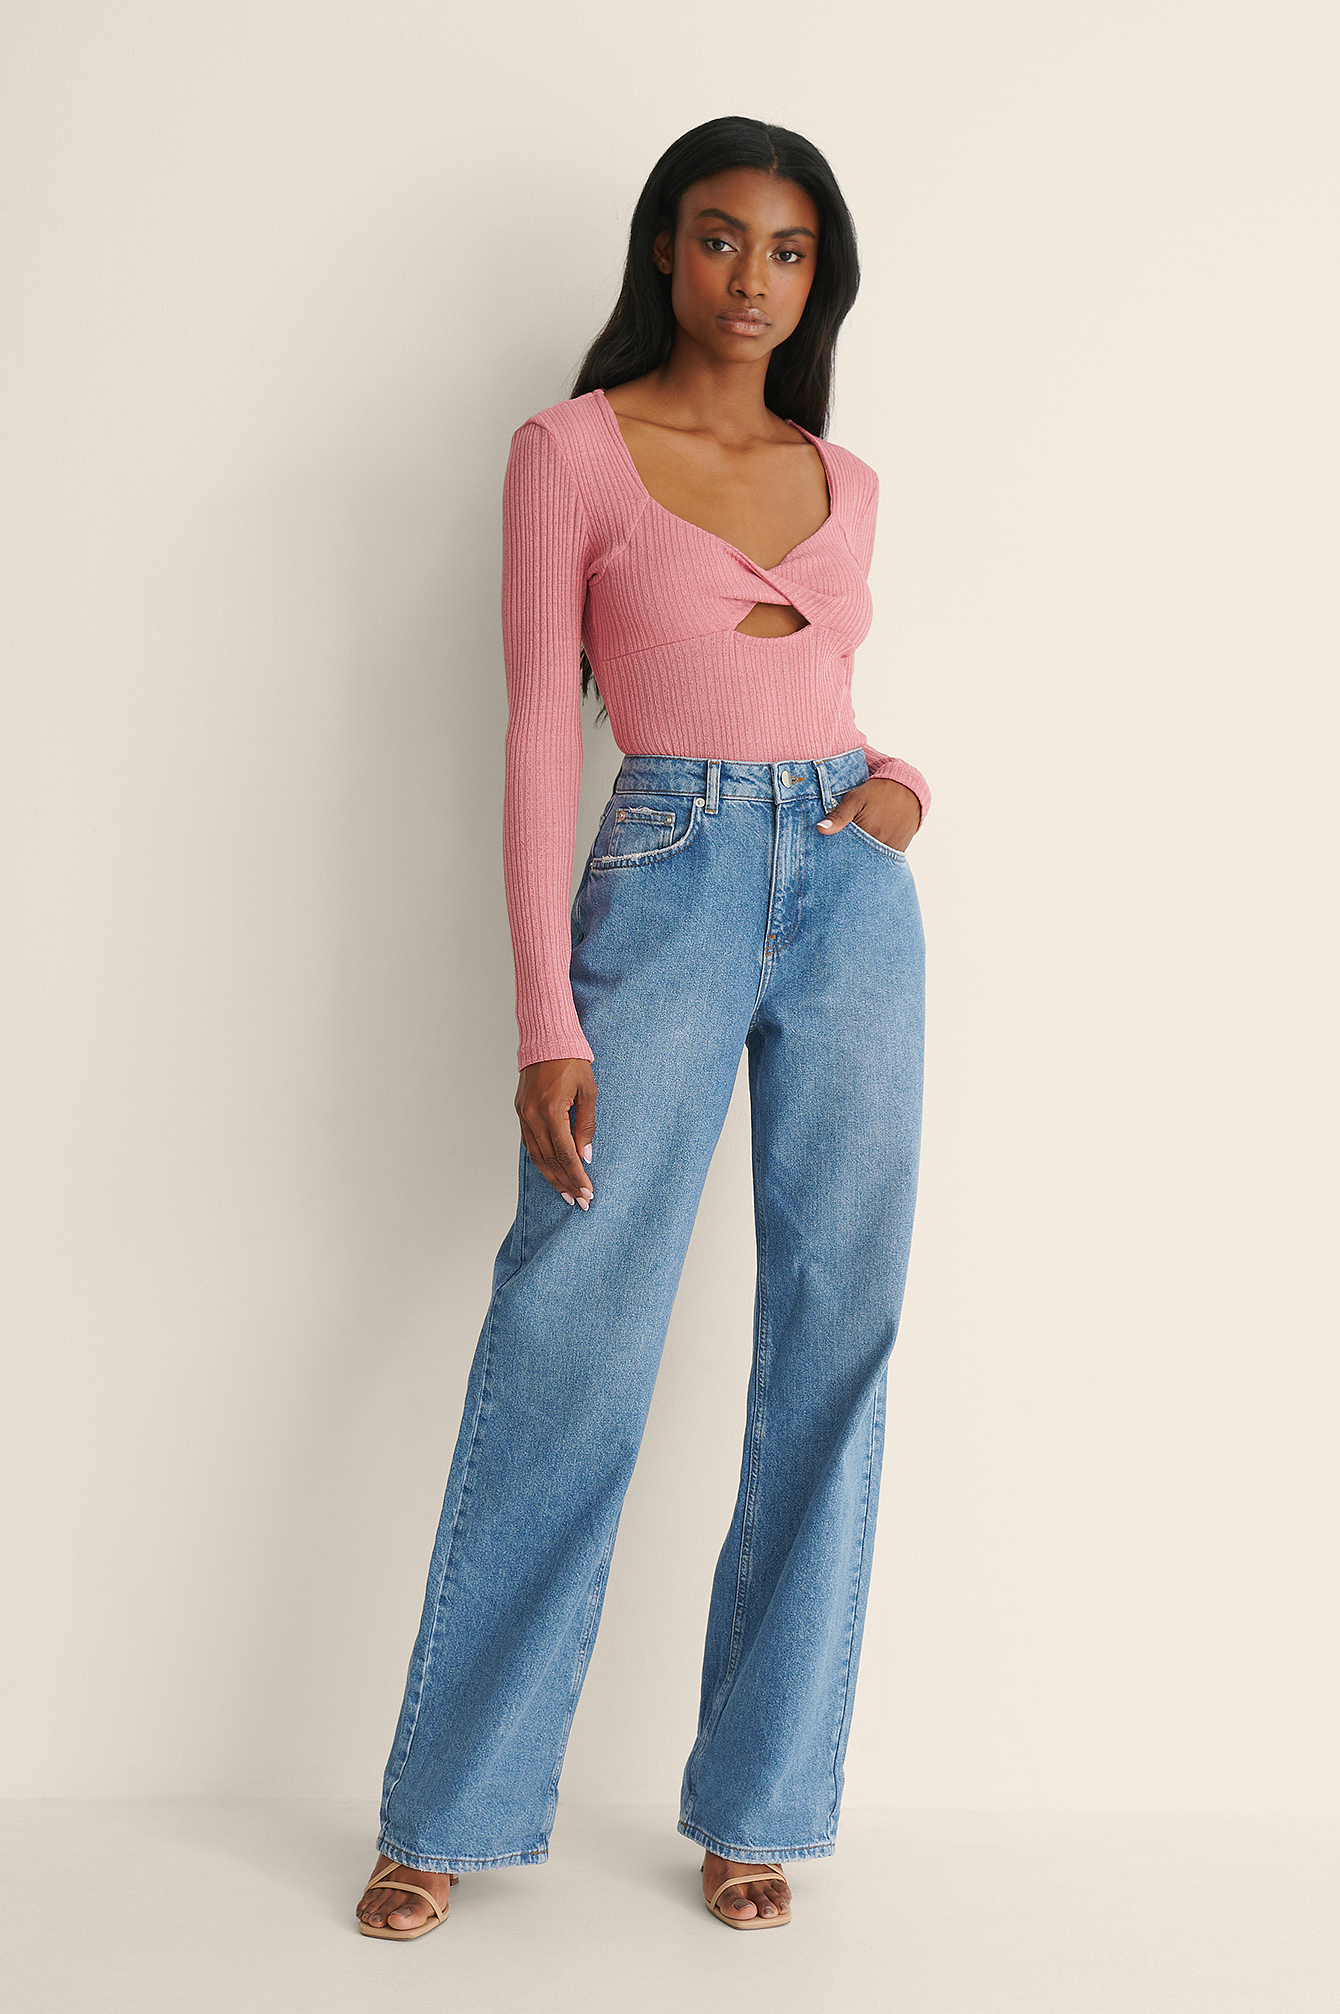 Ribbed Front Twist Top Outfit.